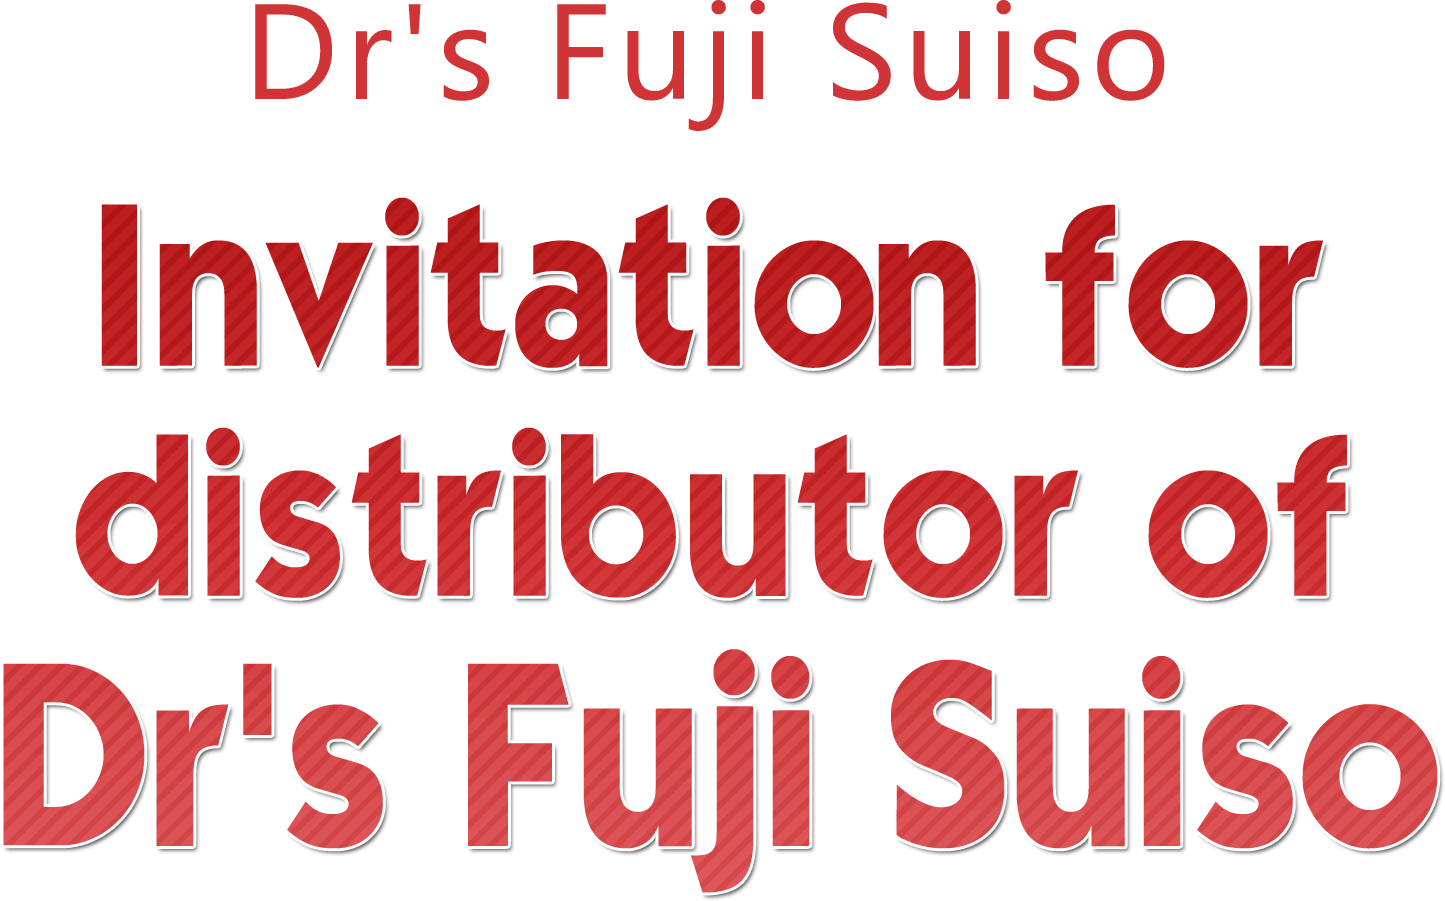 Dr's Fuji Suiso. Worldwide healthcare cost cut. ONE FOR ALL, ALL 